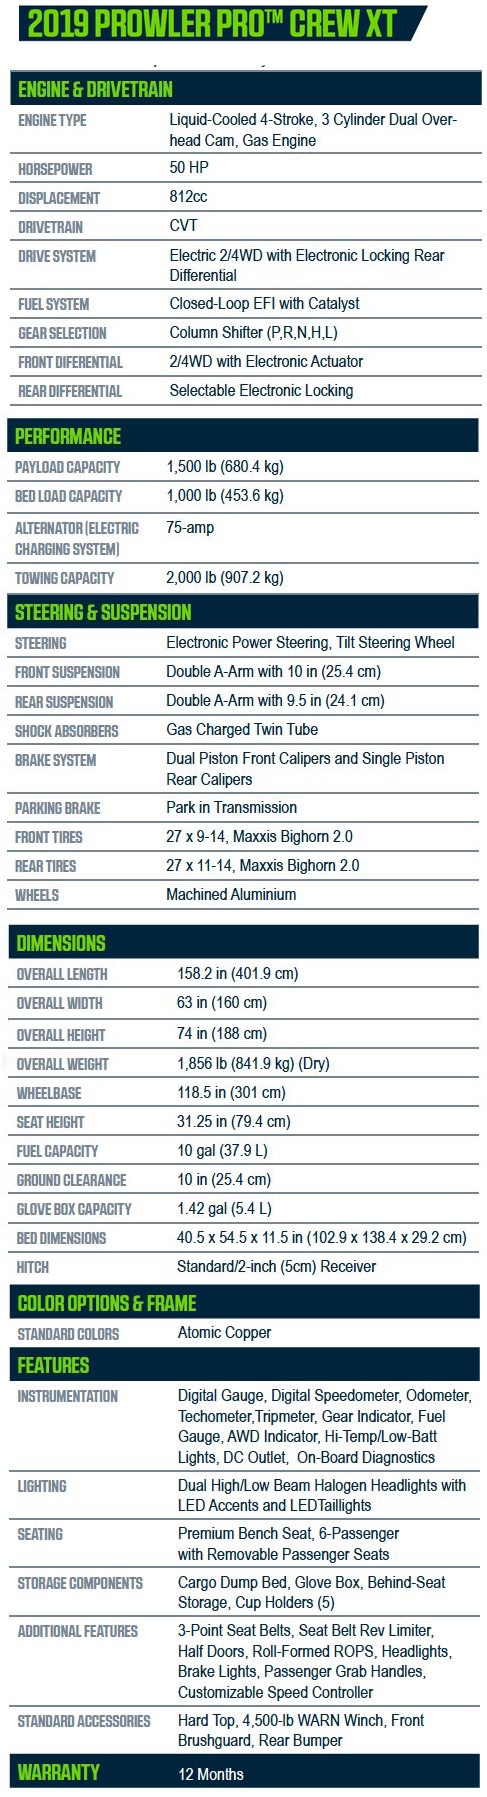 2019 Prowler Pro Crew XT Specifications